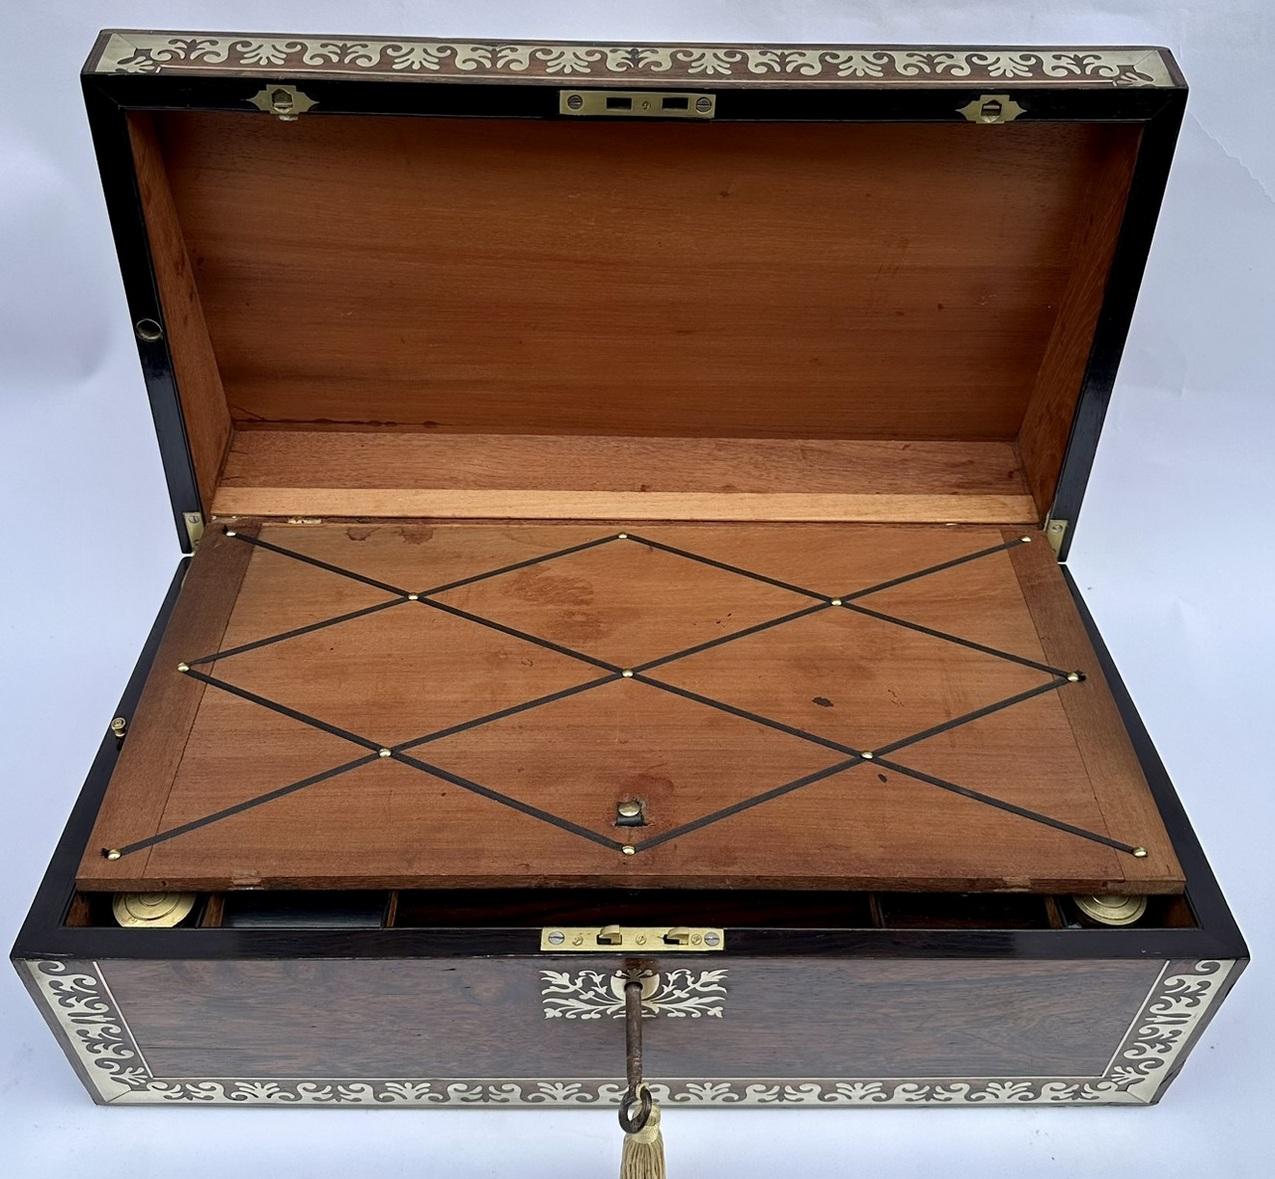 Antique Regency Brass Inlaid Mahogany Traveling Desk Wooden Writing Slope Box For Sale 1